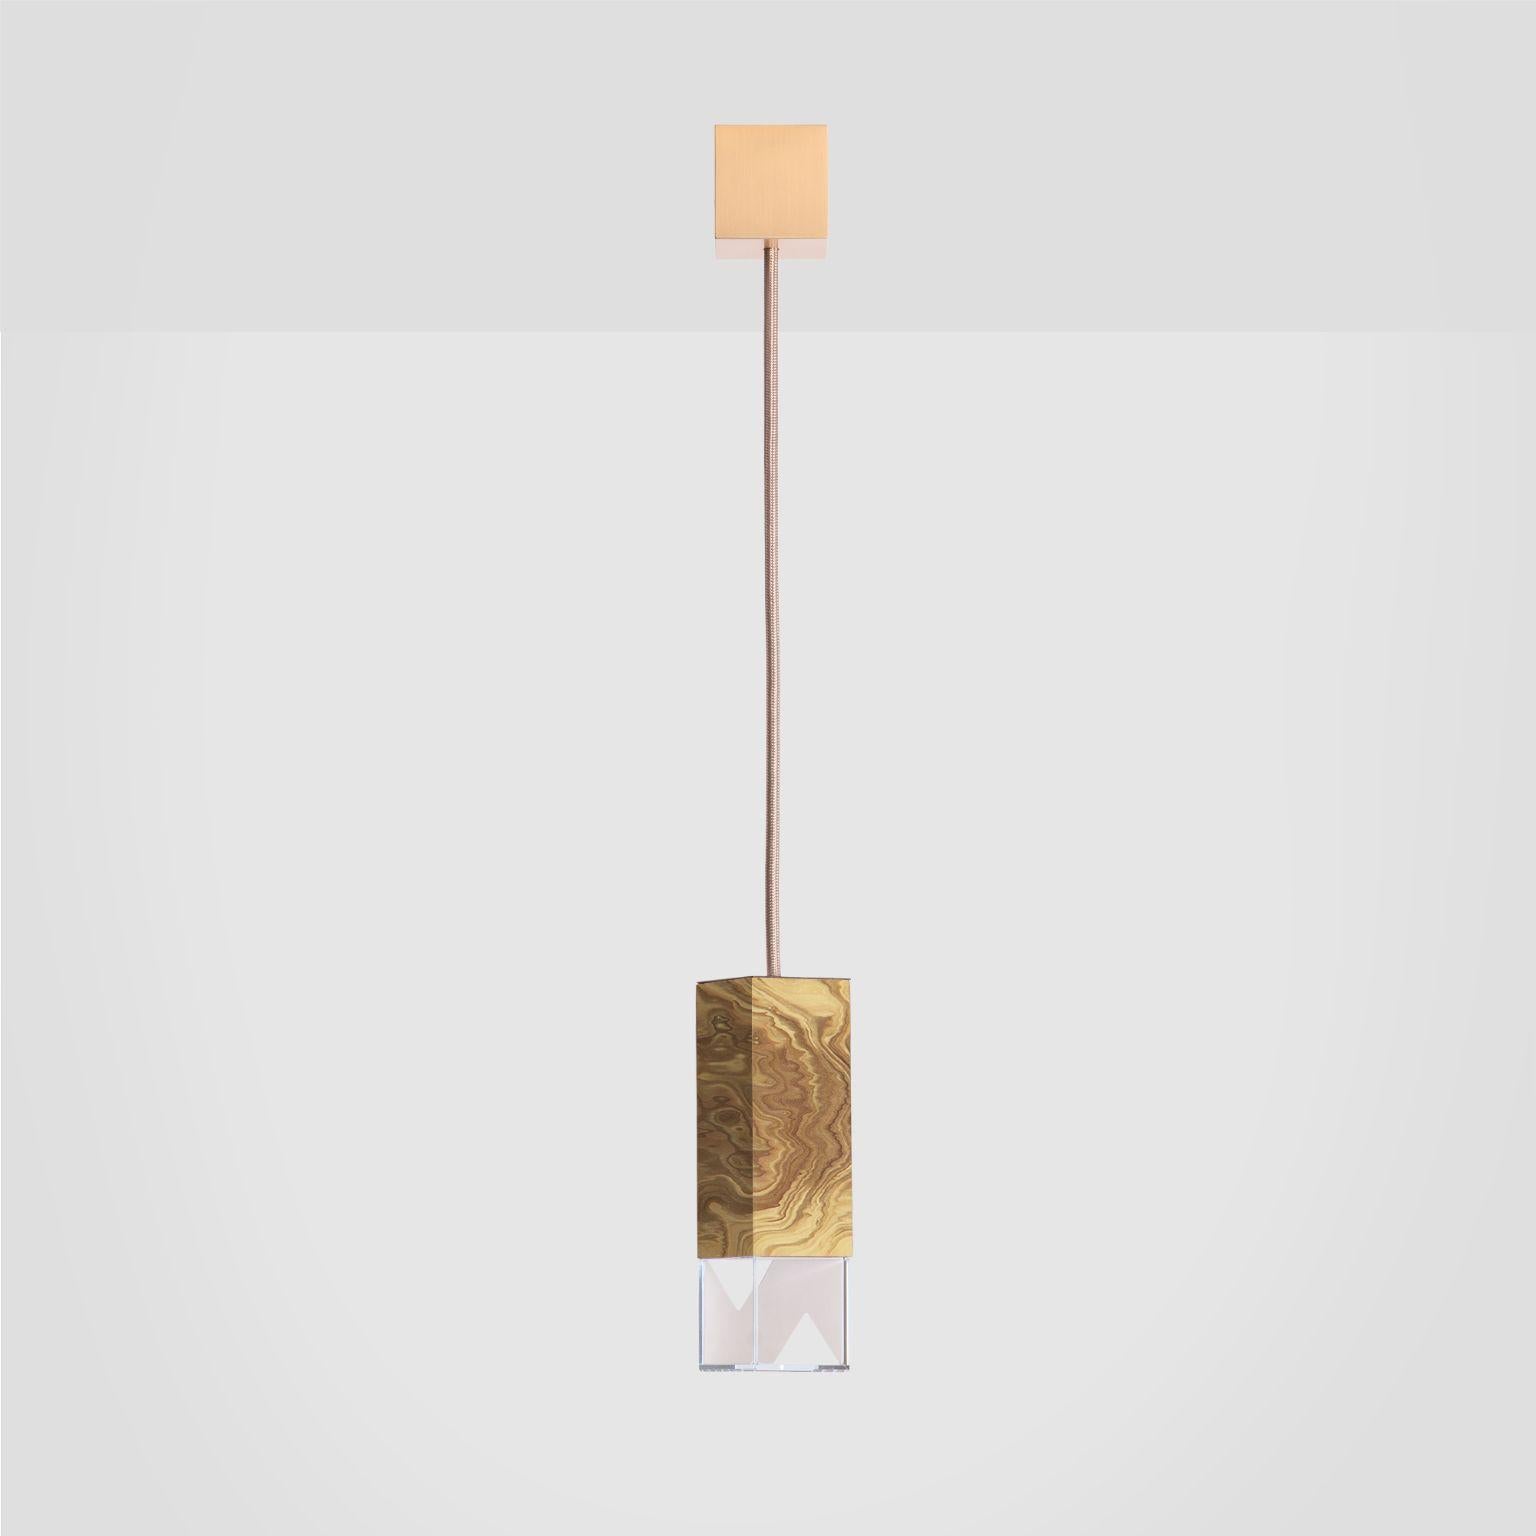 Lamp one wood 01 by Formaminima
Dimensions: D 5 x W 5 x H 17 cm.
Materials: Body lamp: Olive briarwood, Crystal glass diffuser, Limoges porcelain sheets, biscuit-finish. Ceiling rose: solid brass, satin finish.

Light source supplied per